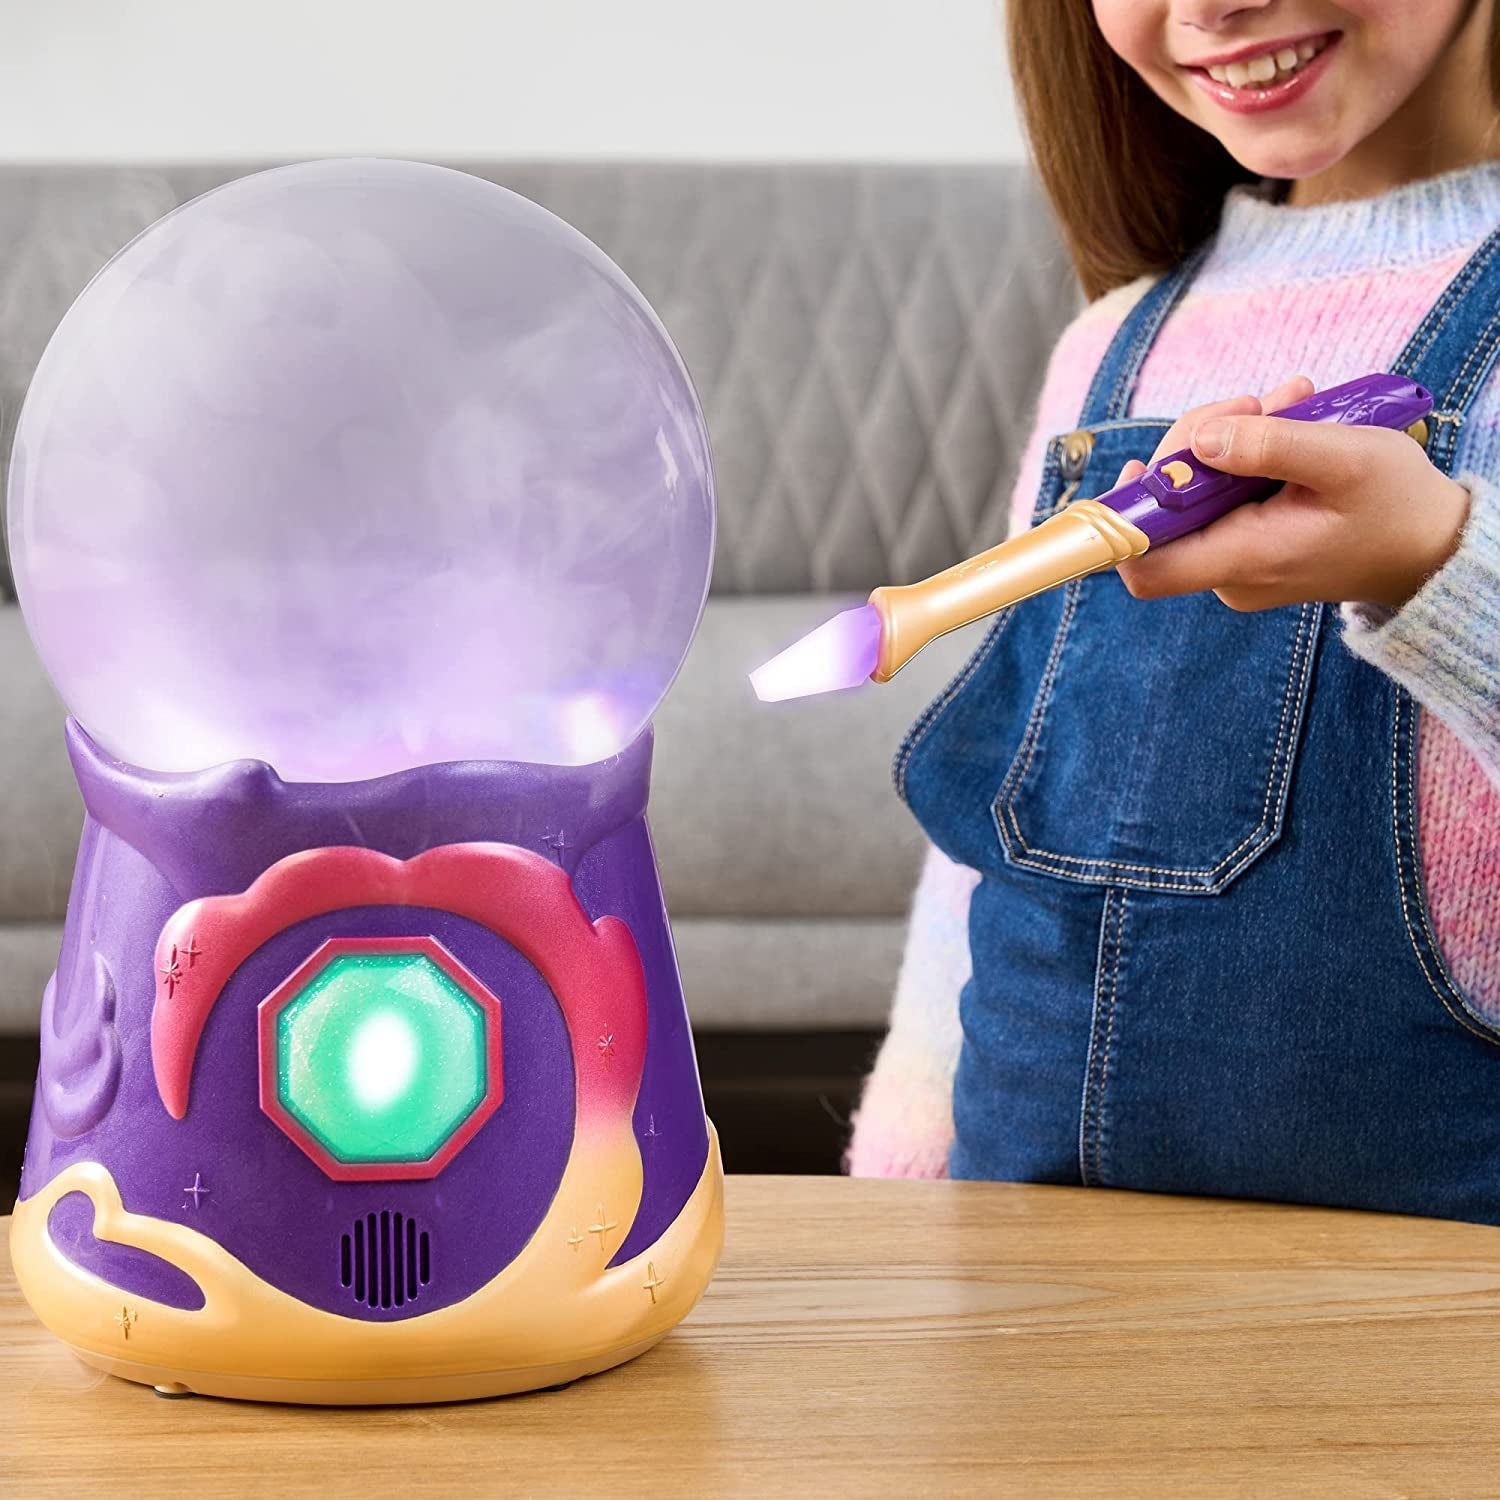 a child playing with the magic mixie